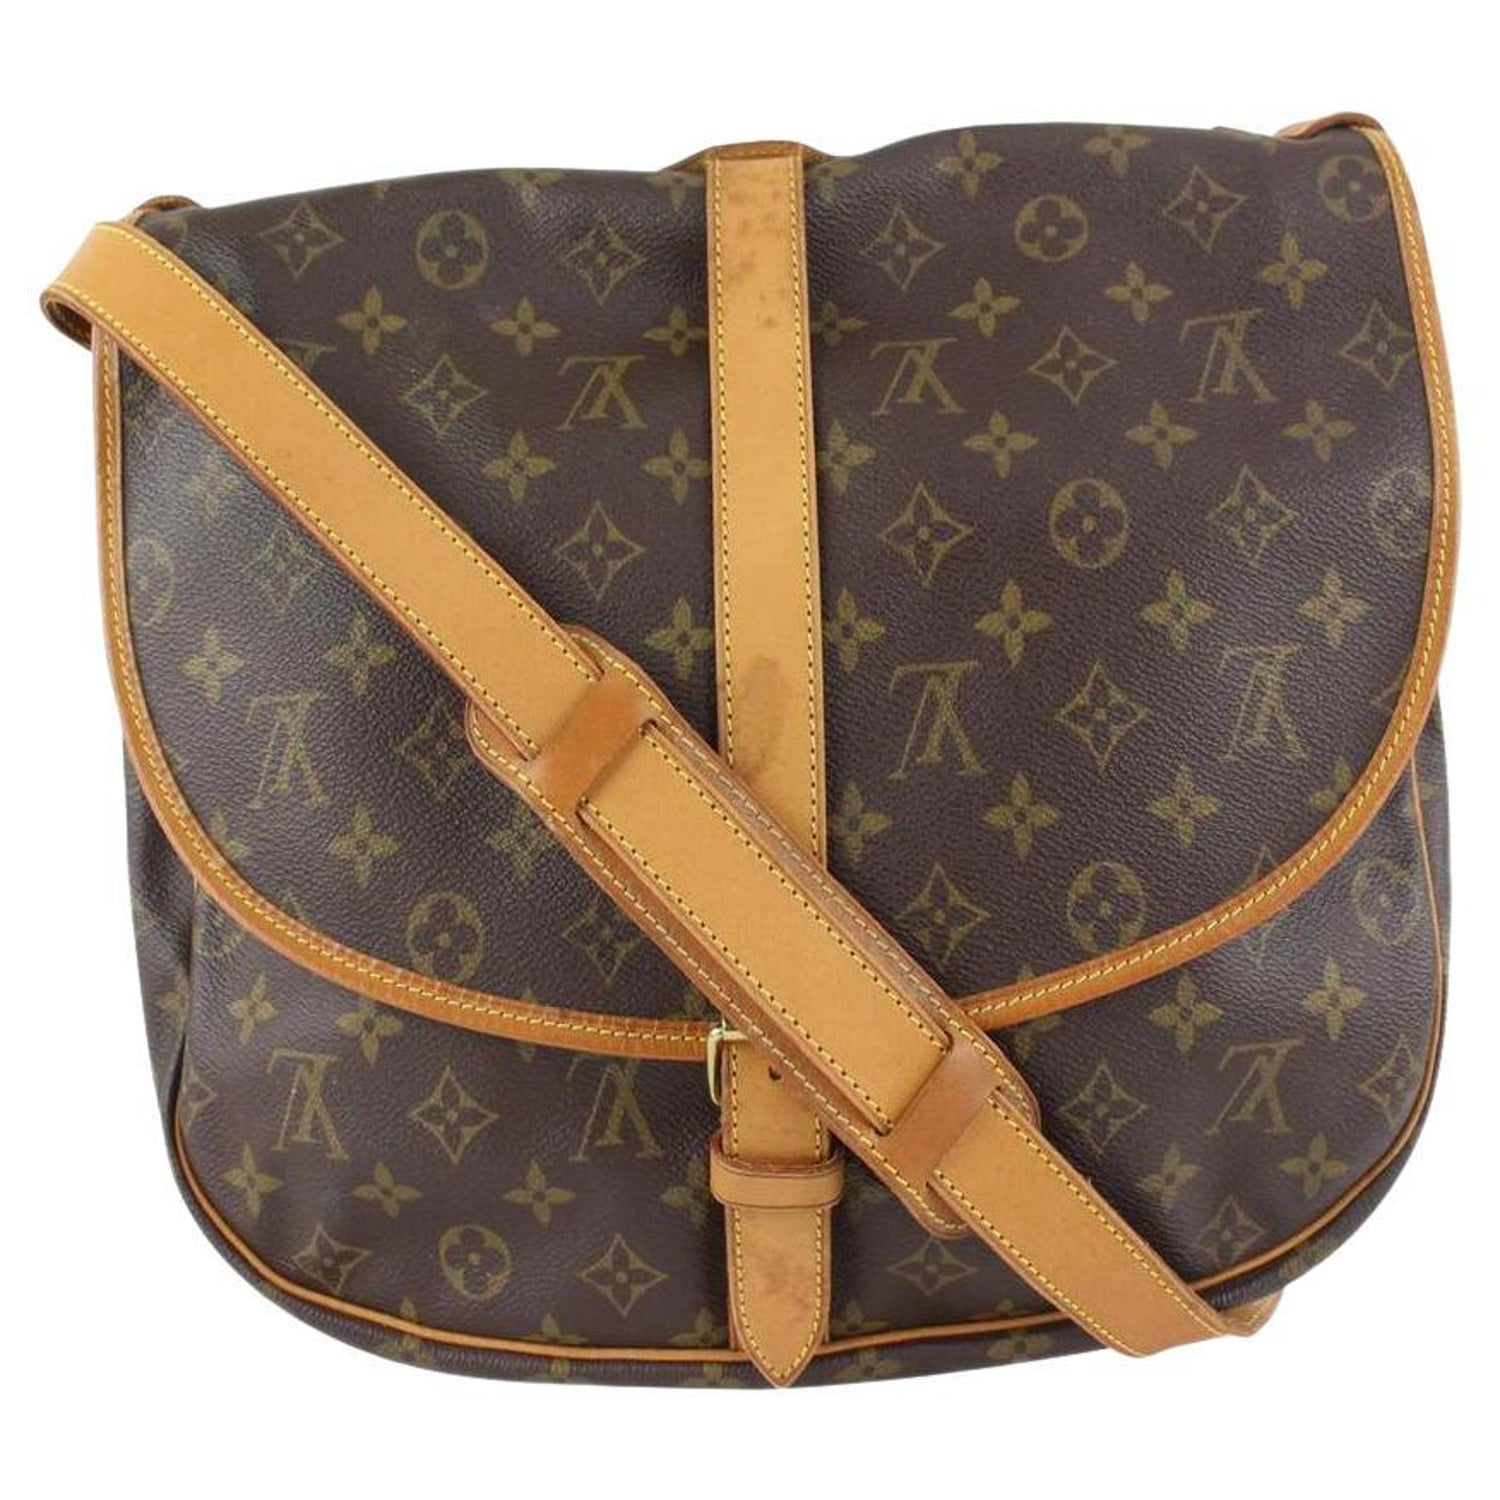 History Of The Louis Vuitton Saumur Bag - Pretty Simple Bags